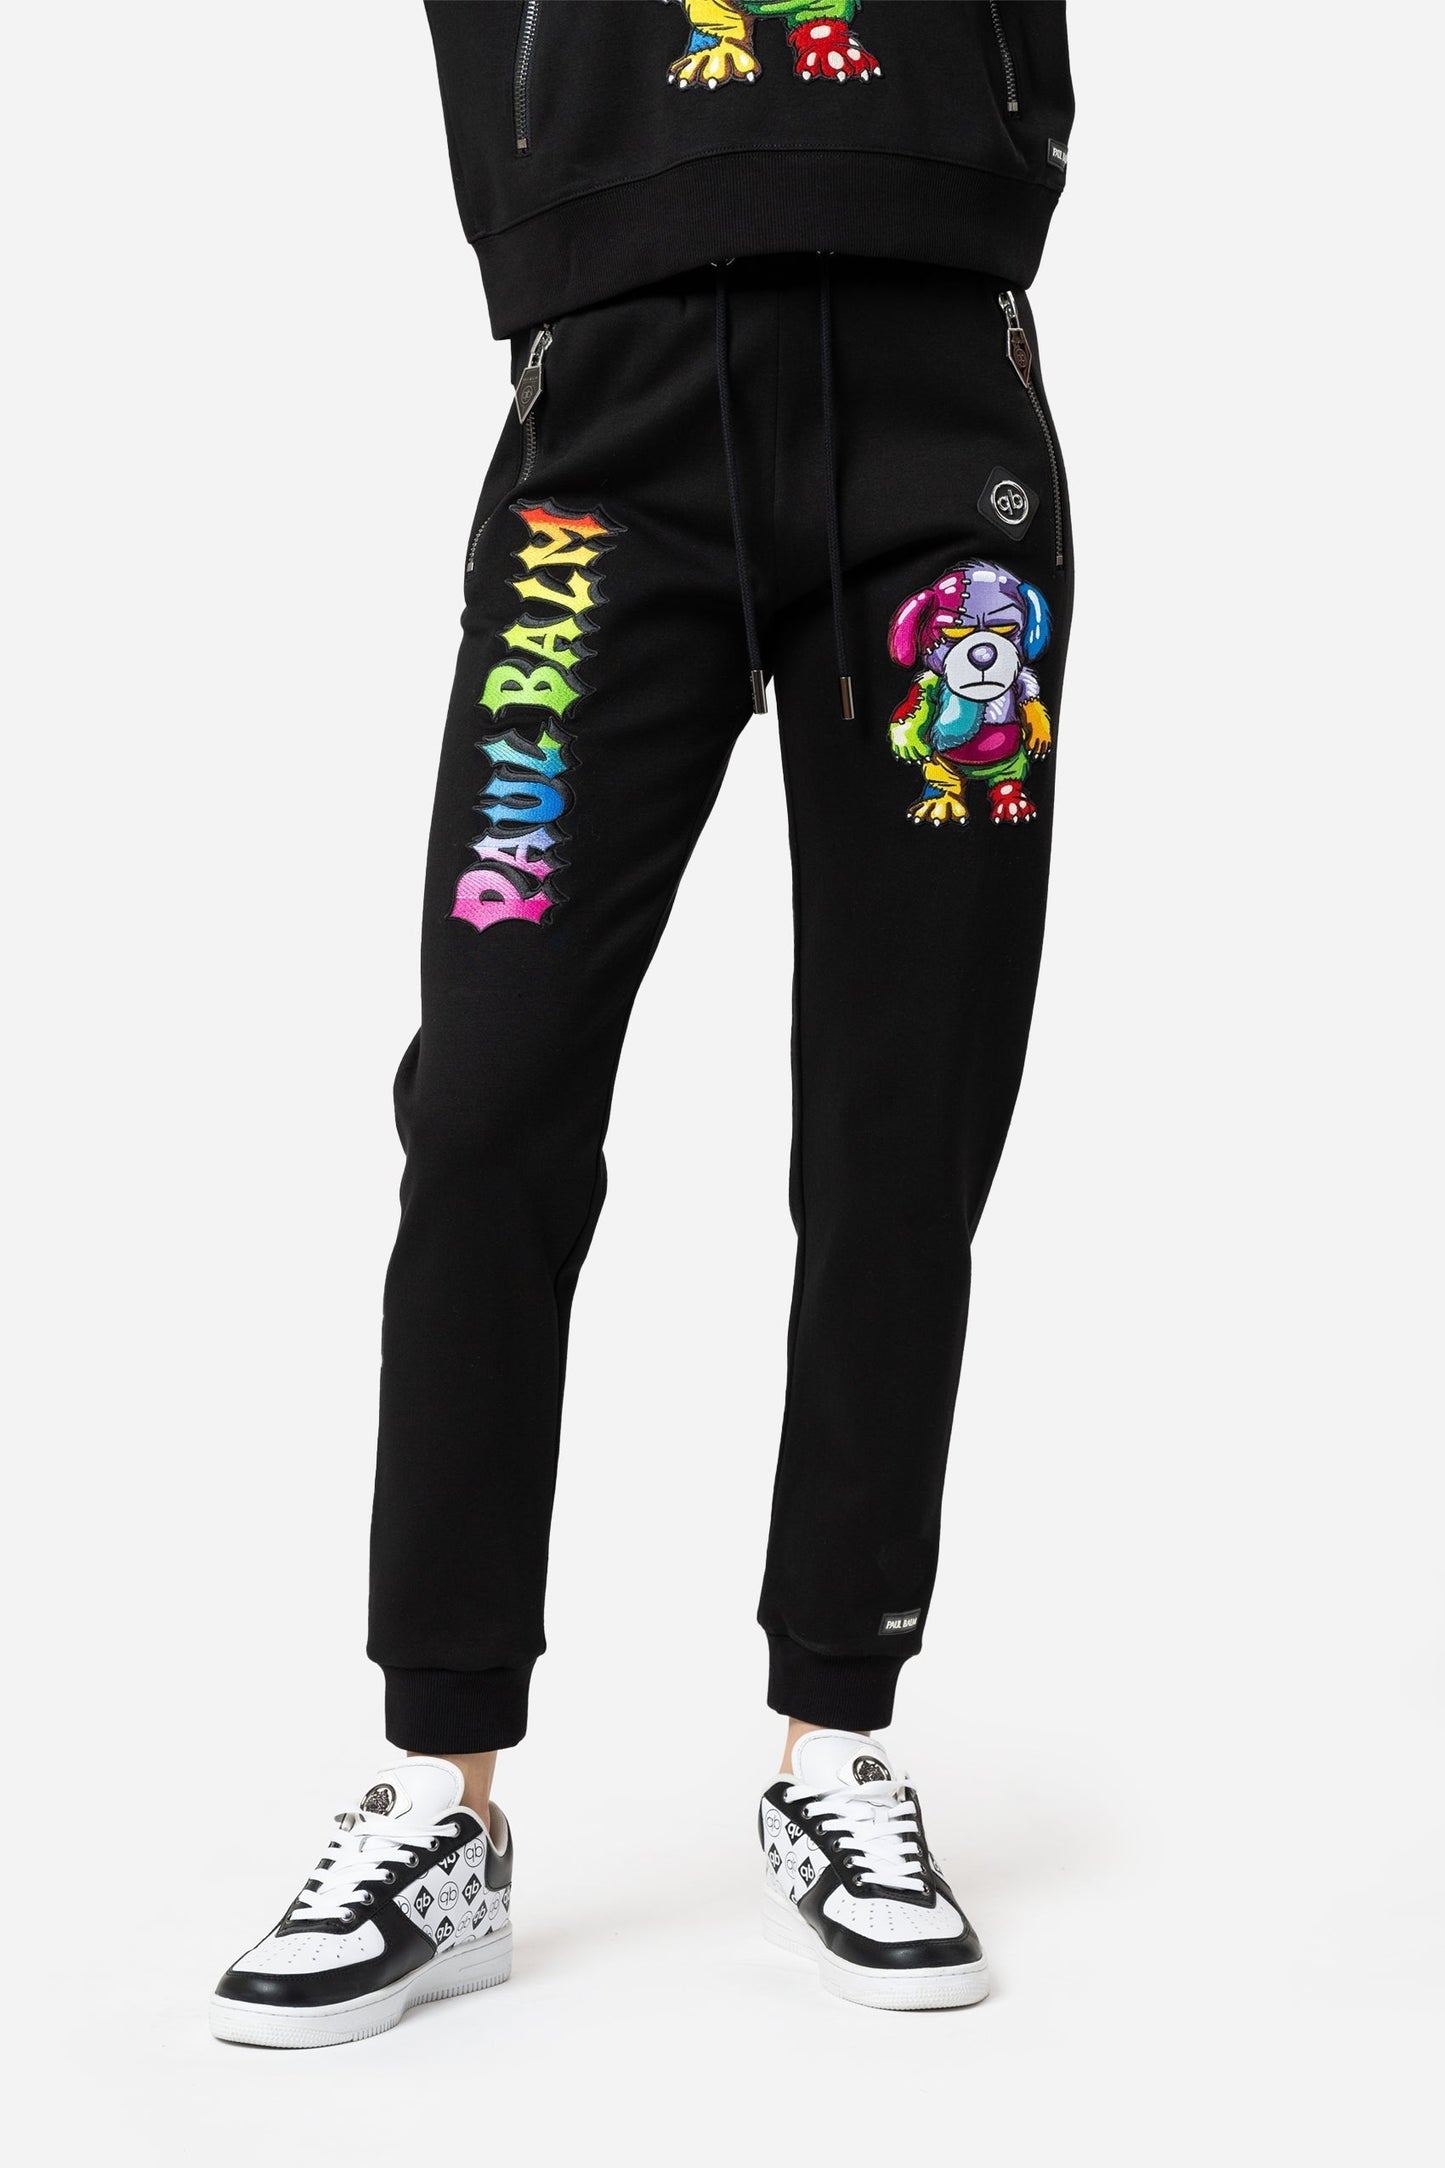 Embroidered Rainbow Teddy Pants - Limited to 300 - PAUL BALM WORLD